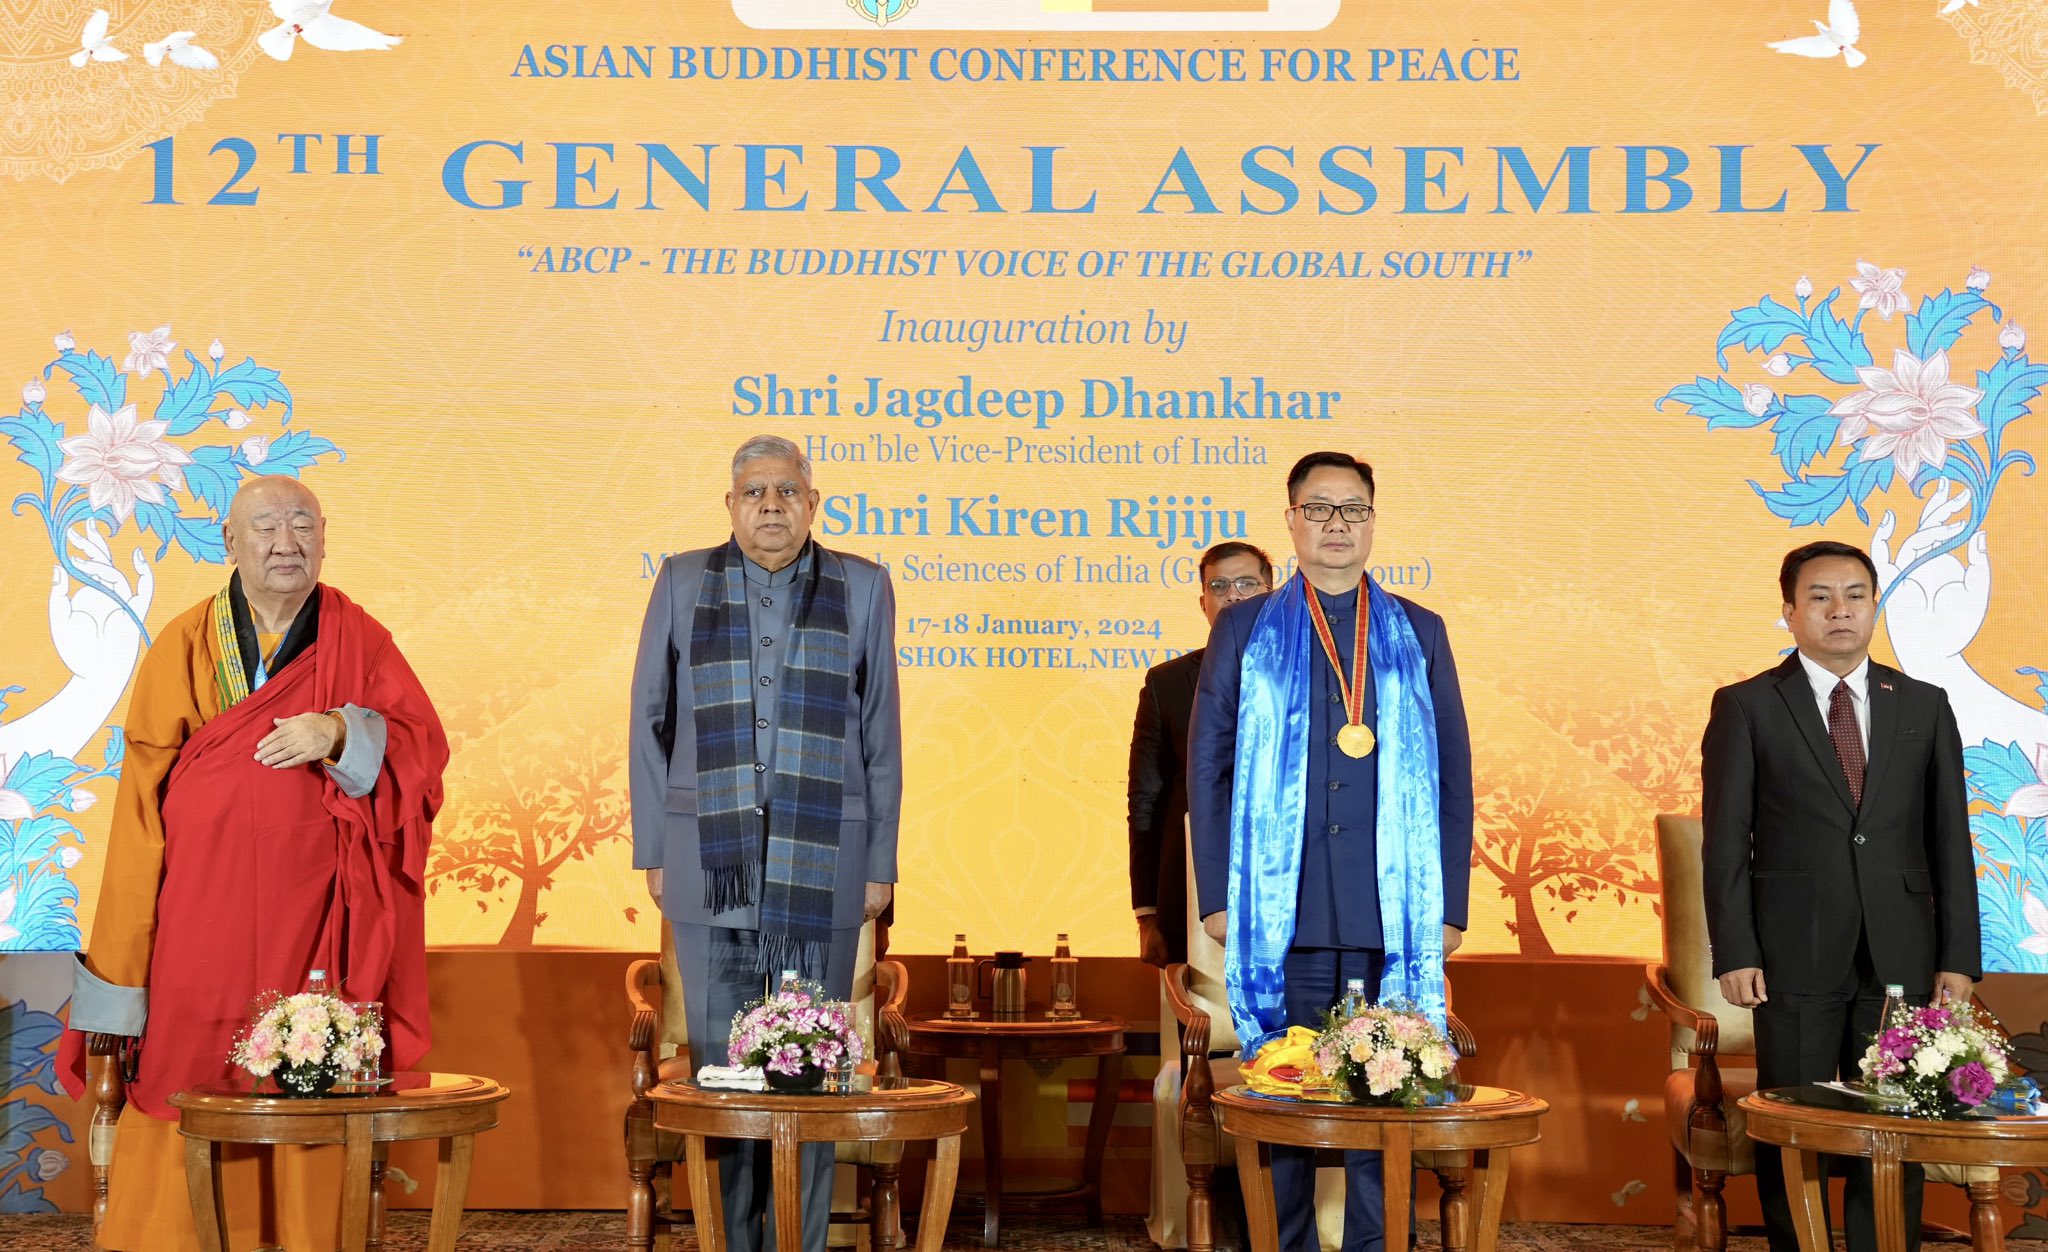 The  Vice-President, Shri Jagdeep Dhankhar at the 12th General Assembly of the Asian Buddhist Conference for Peace (ABCP), in New Delhi on January 17, 2024.